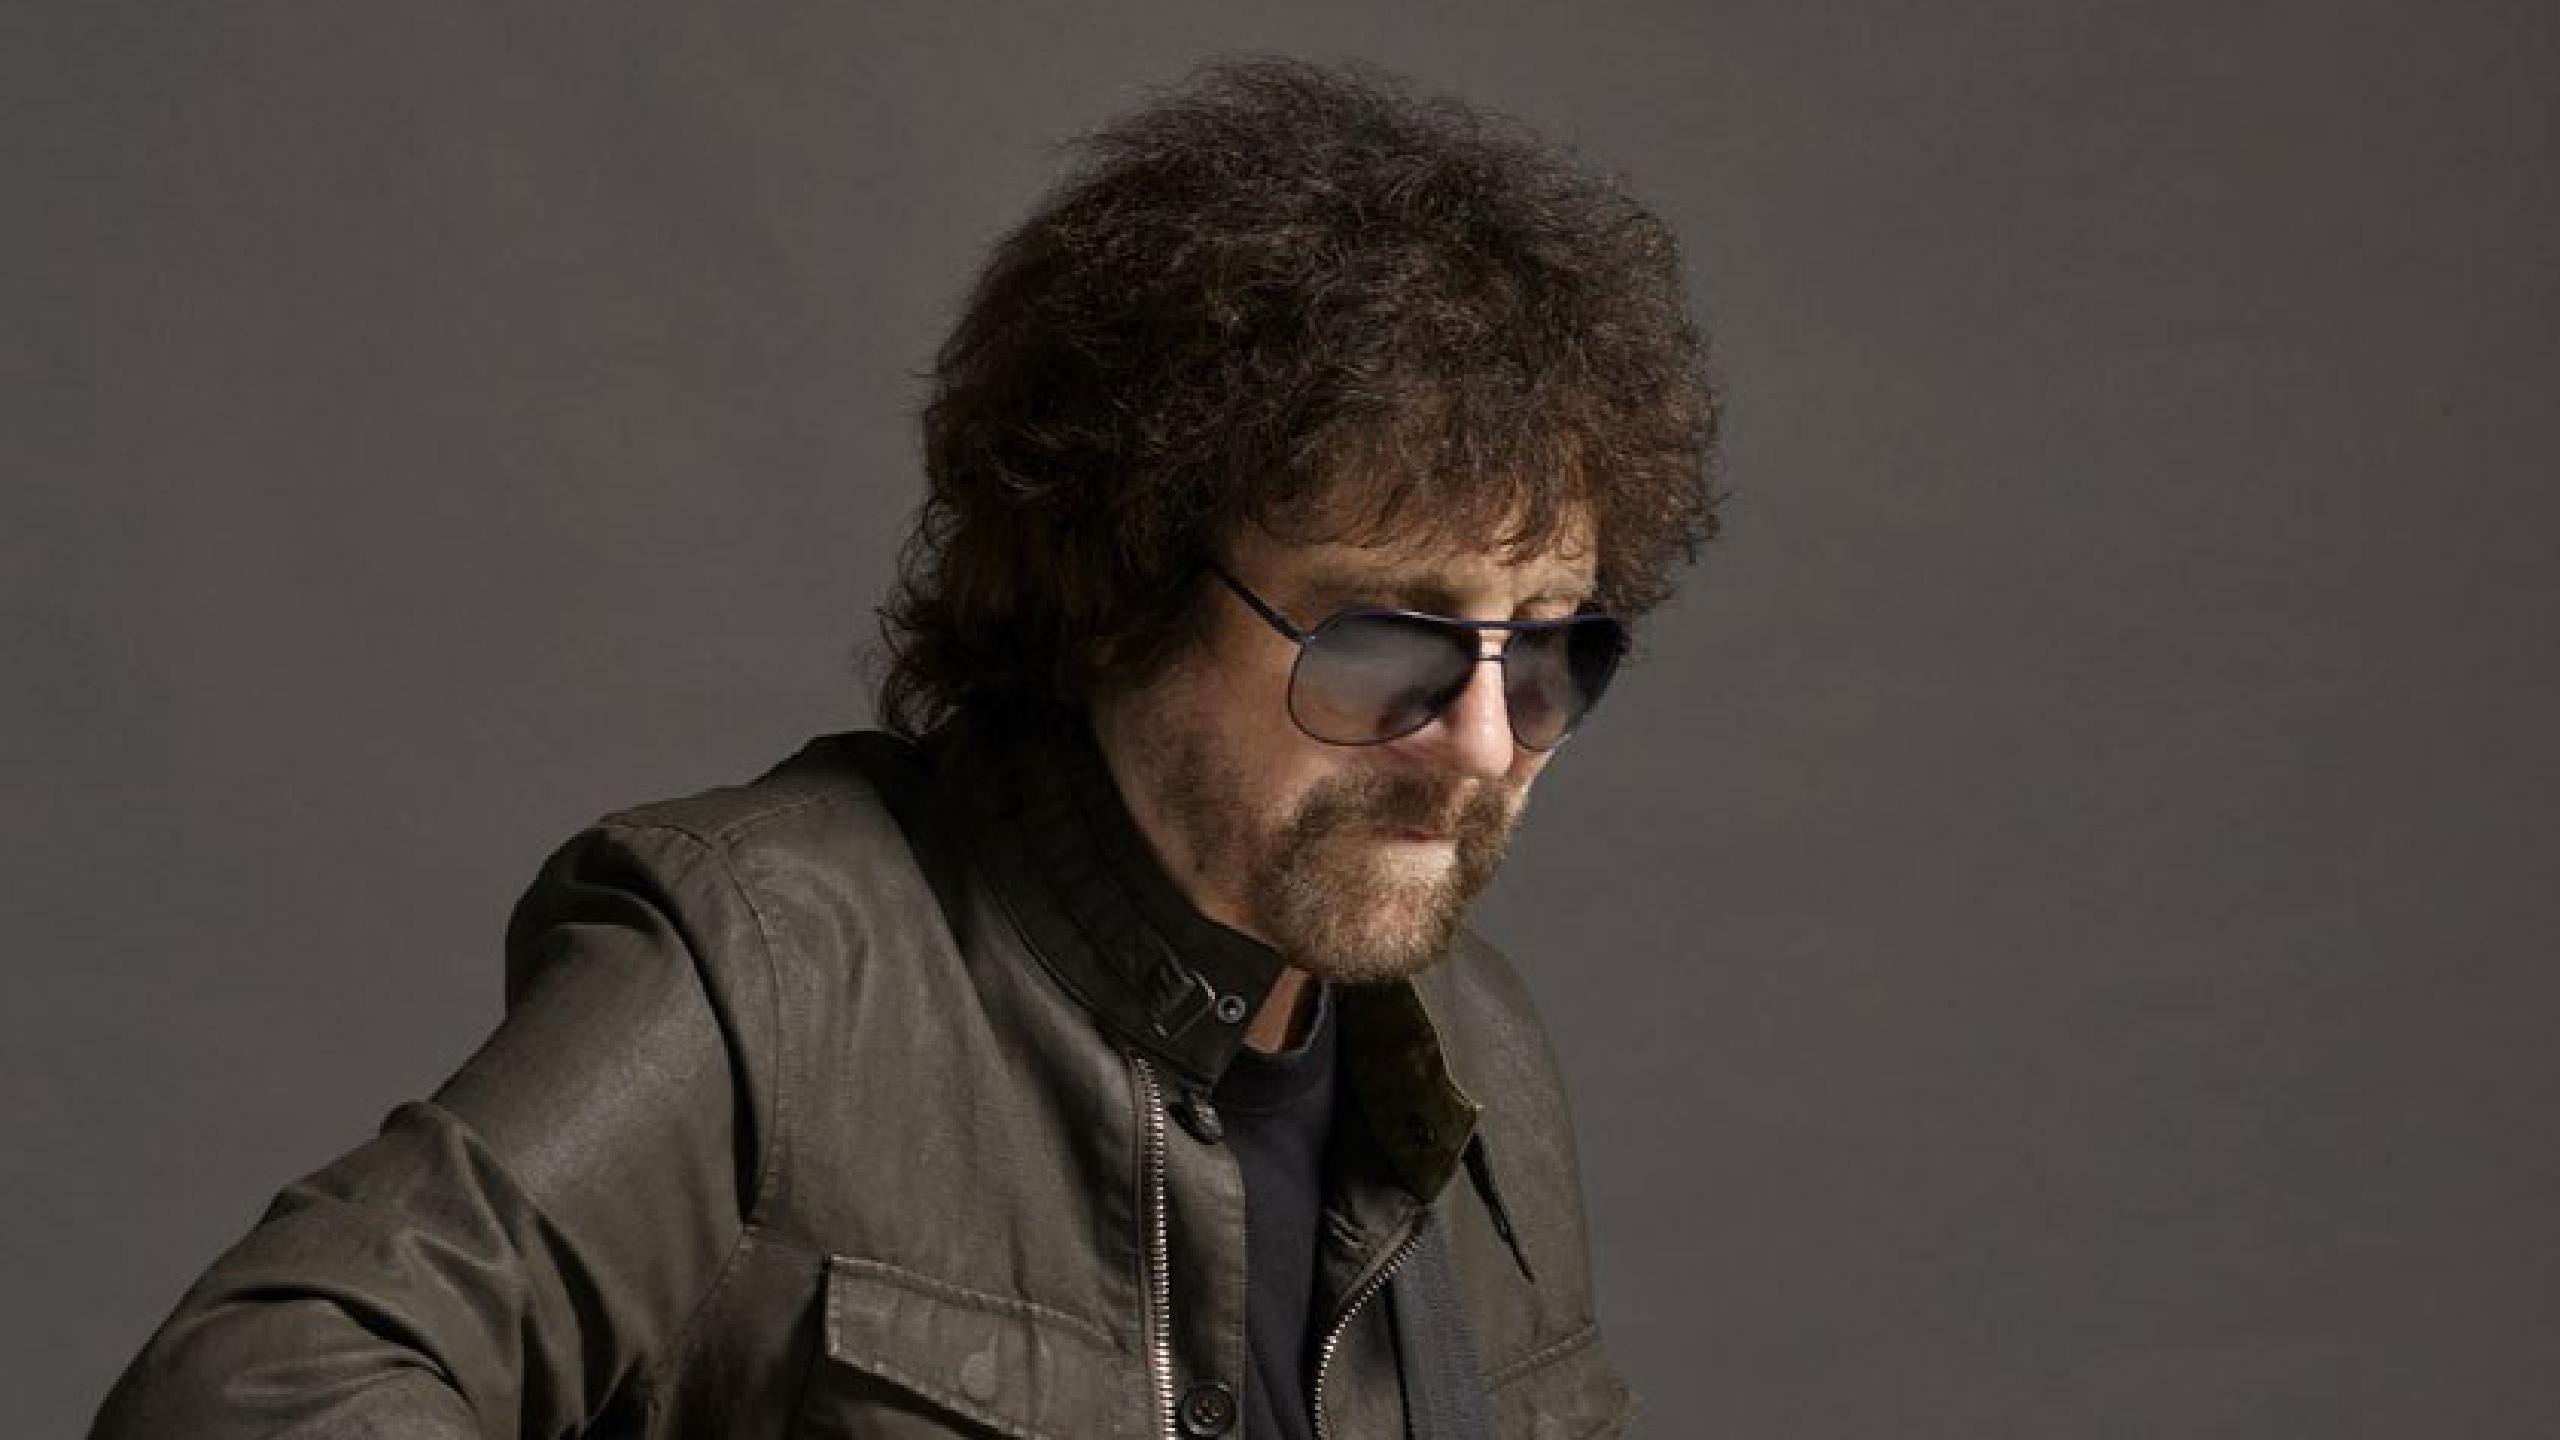 Jeff Lynne tour dates 2022 2023. Jeff Lynne tickets and concerts